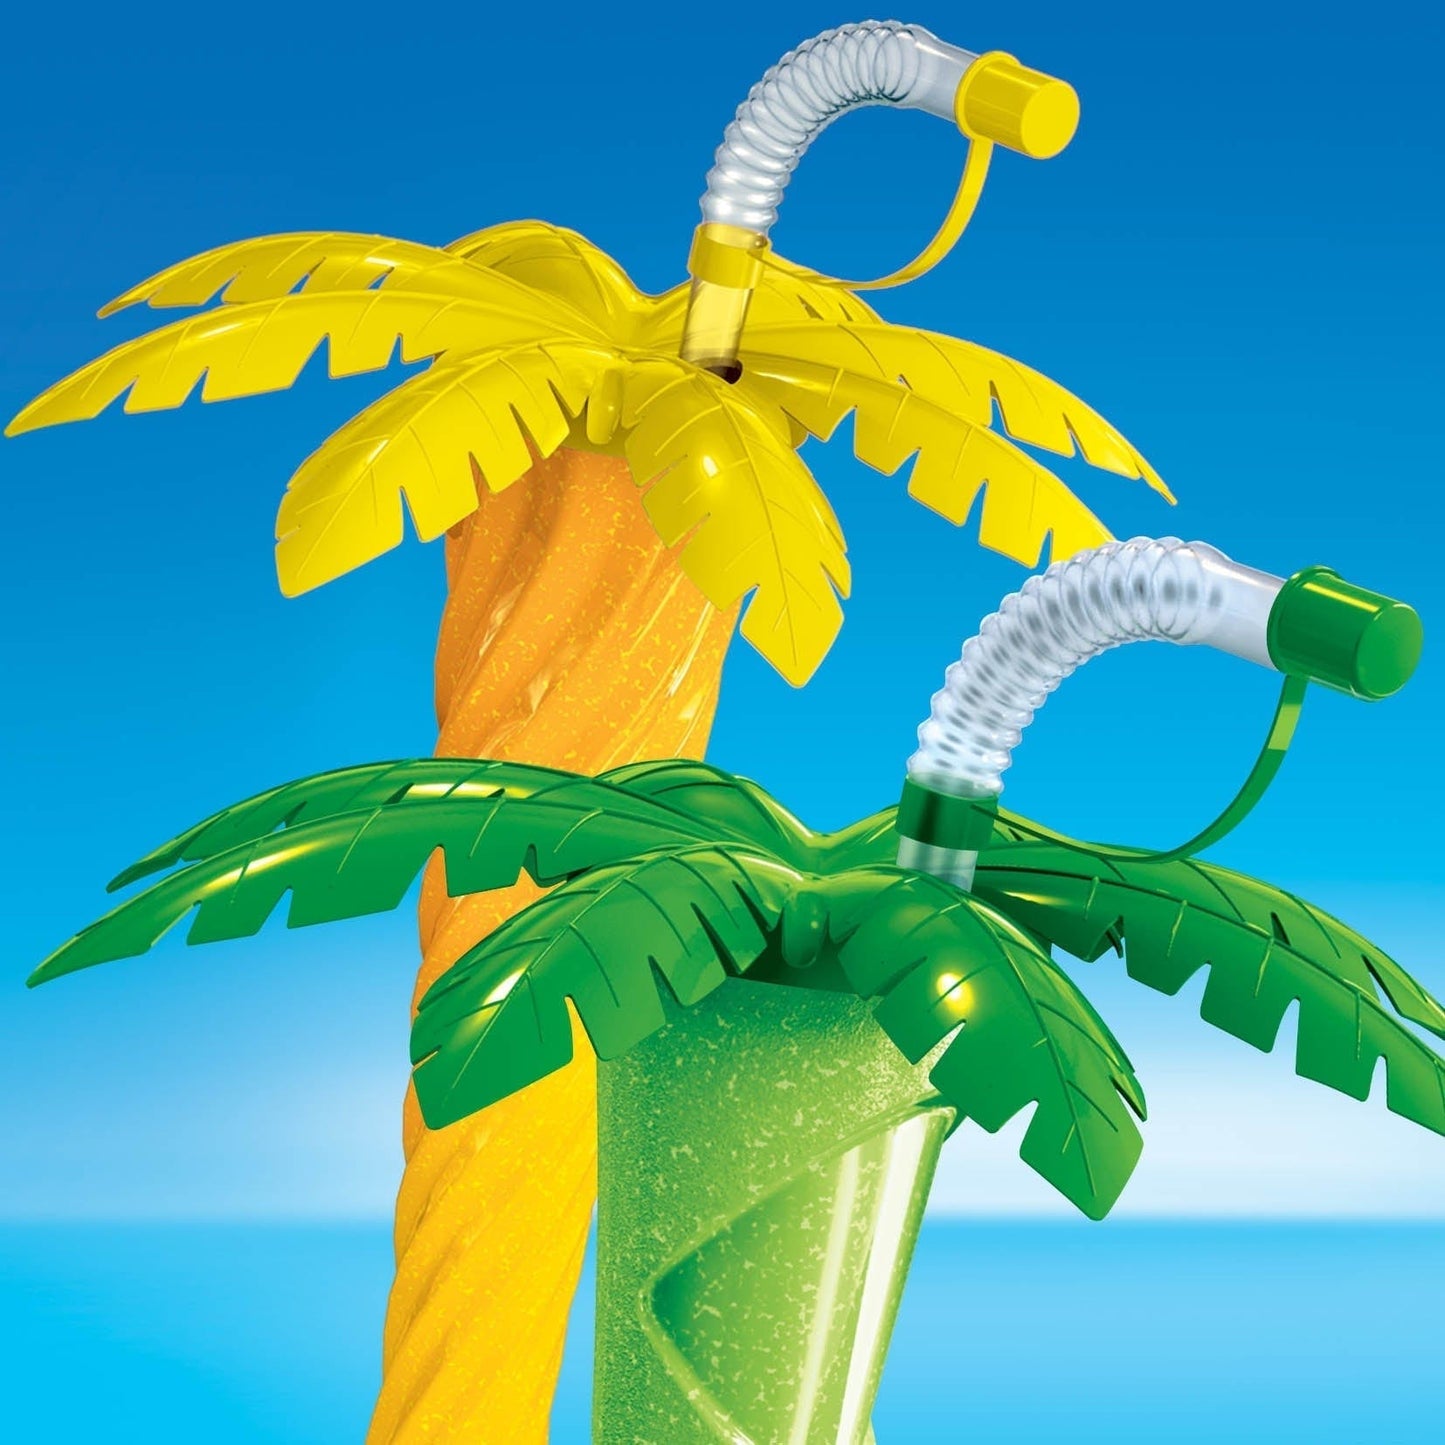 Sweet World USA Yard Cups Palm Cup Palm Tree Luau Yard Cups (108 cups) - for Margaritas, Cold Drinks, Frozen Drinks, Kids Parties - 9 oz. (250 ml) - Green cups with lids and straws